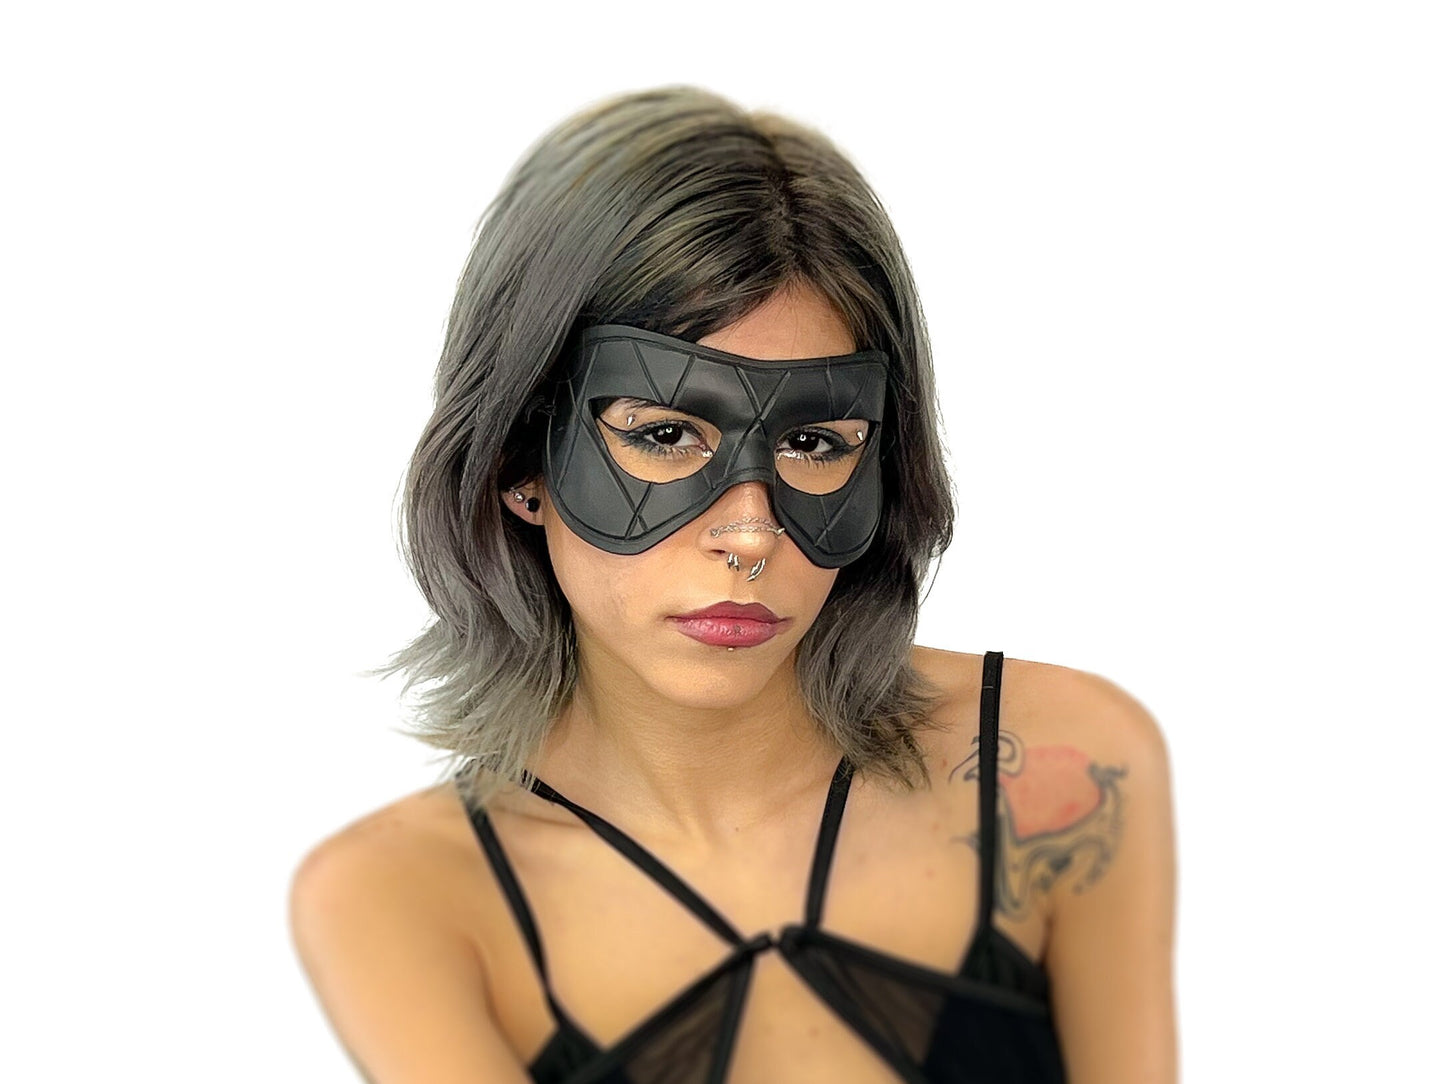 Compact Harlequin Handmade Genuine Leather Mask in Solid Black